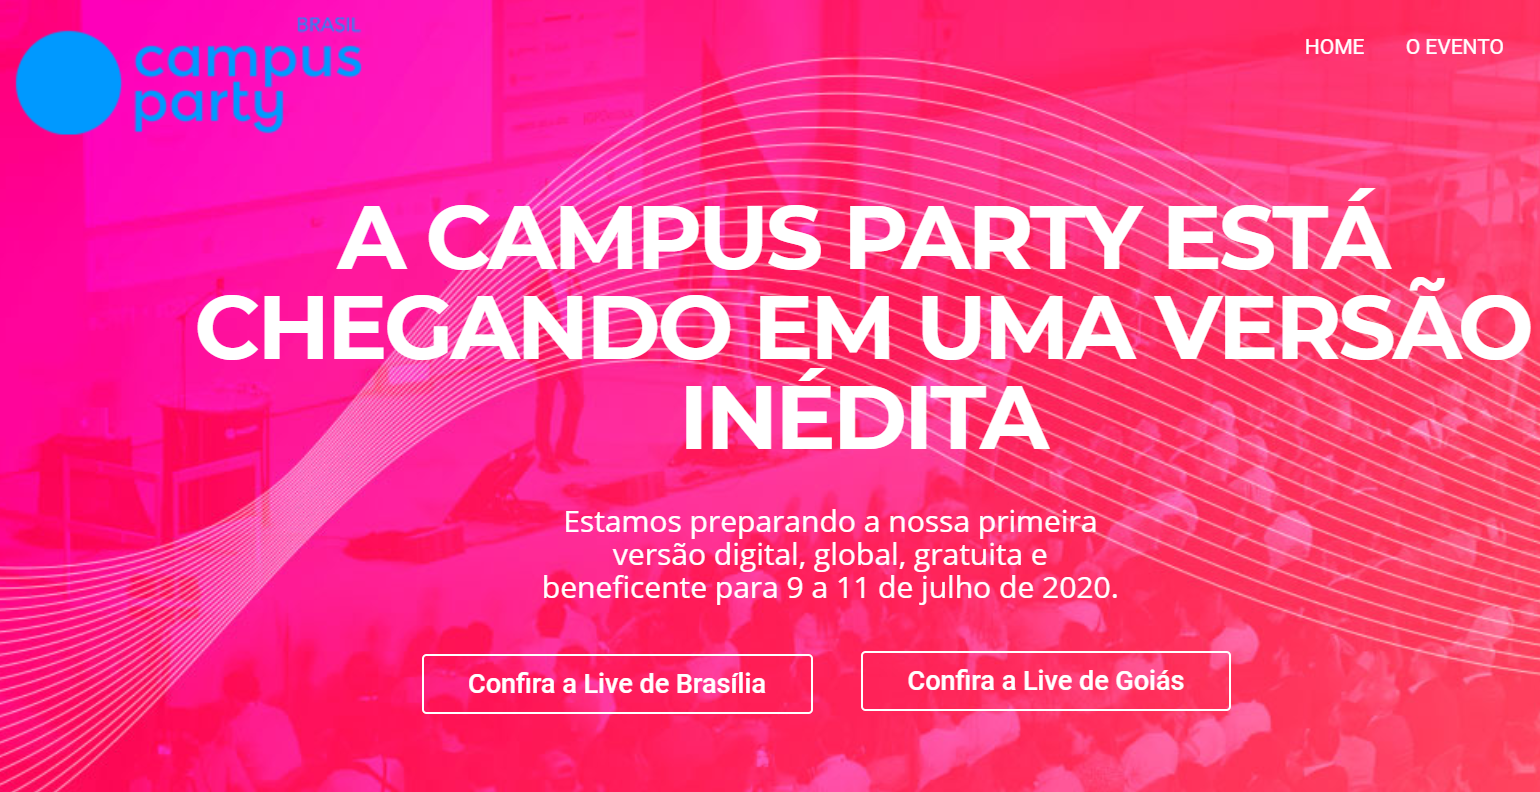 campusparty.PNG - 1.49 MB